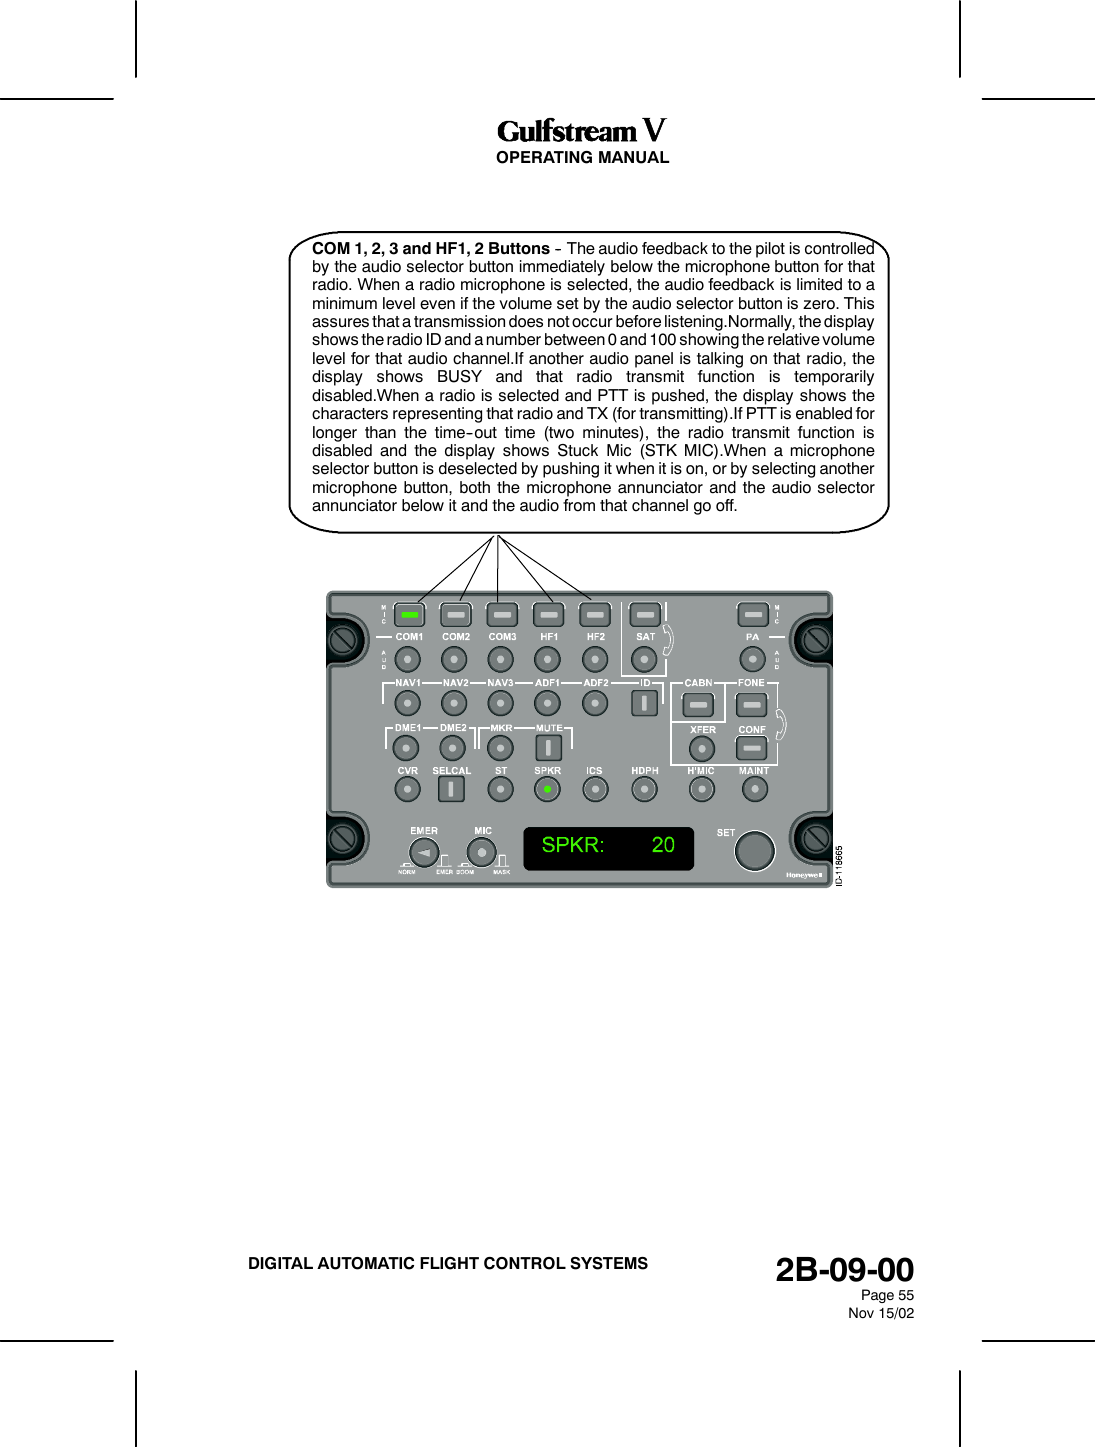 OPERATING MANUAL2B-09-00Page 55Nov 15/02DIGITAL AUTOMATIC FLIGHT CONTROL SYSTEMSCOM1,2,3andHF1,2Buttons-- The audio feedback to the pilot is controlledby the audio selector button immediately below the microphone button for thatradio. When a radio microphone is selected, the audio feedback is limited to aminimum level even if the volume set by the audio selector button is zero. Thisassures that a transmission does not occur before listening.Normally, the displayshows the radio ID and a number between 0 and 100 showing the relative volumelevel for that audio channel.If another audio panel is talking on that radio, thedisplay shows BUSY and that radio transmit function is temporarilydisabled.When a radio is selected and PTT is pushed, the display shows thecharacters representing that radio and TX (for transmitting).If PTT is enabled forlonger than the time--out time (two minutes), the radio transmit function isdisabled and the display shows Stuck Mic (STK MIC).When a microphoneselector button is deselected by pushing it when it is on, or by selecting anothermicrophone button, both the microphone annunciator and the audio selectorannunciator below it and the audio from that channel go off.